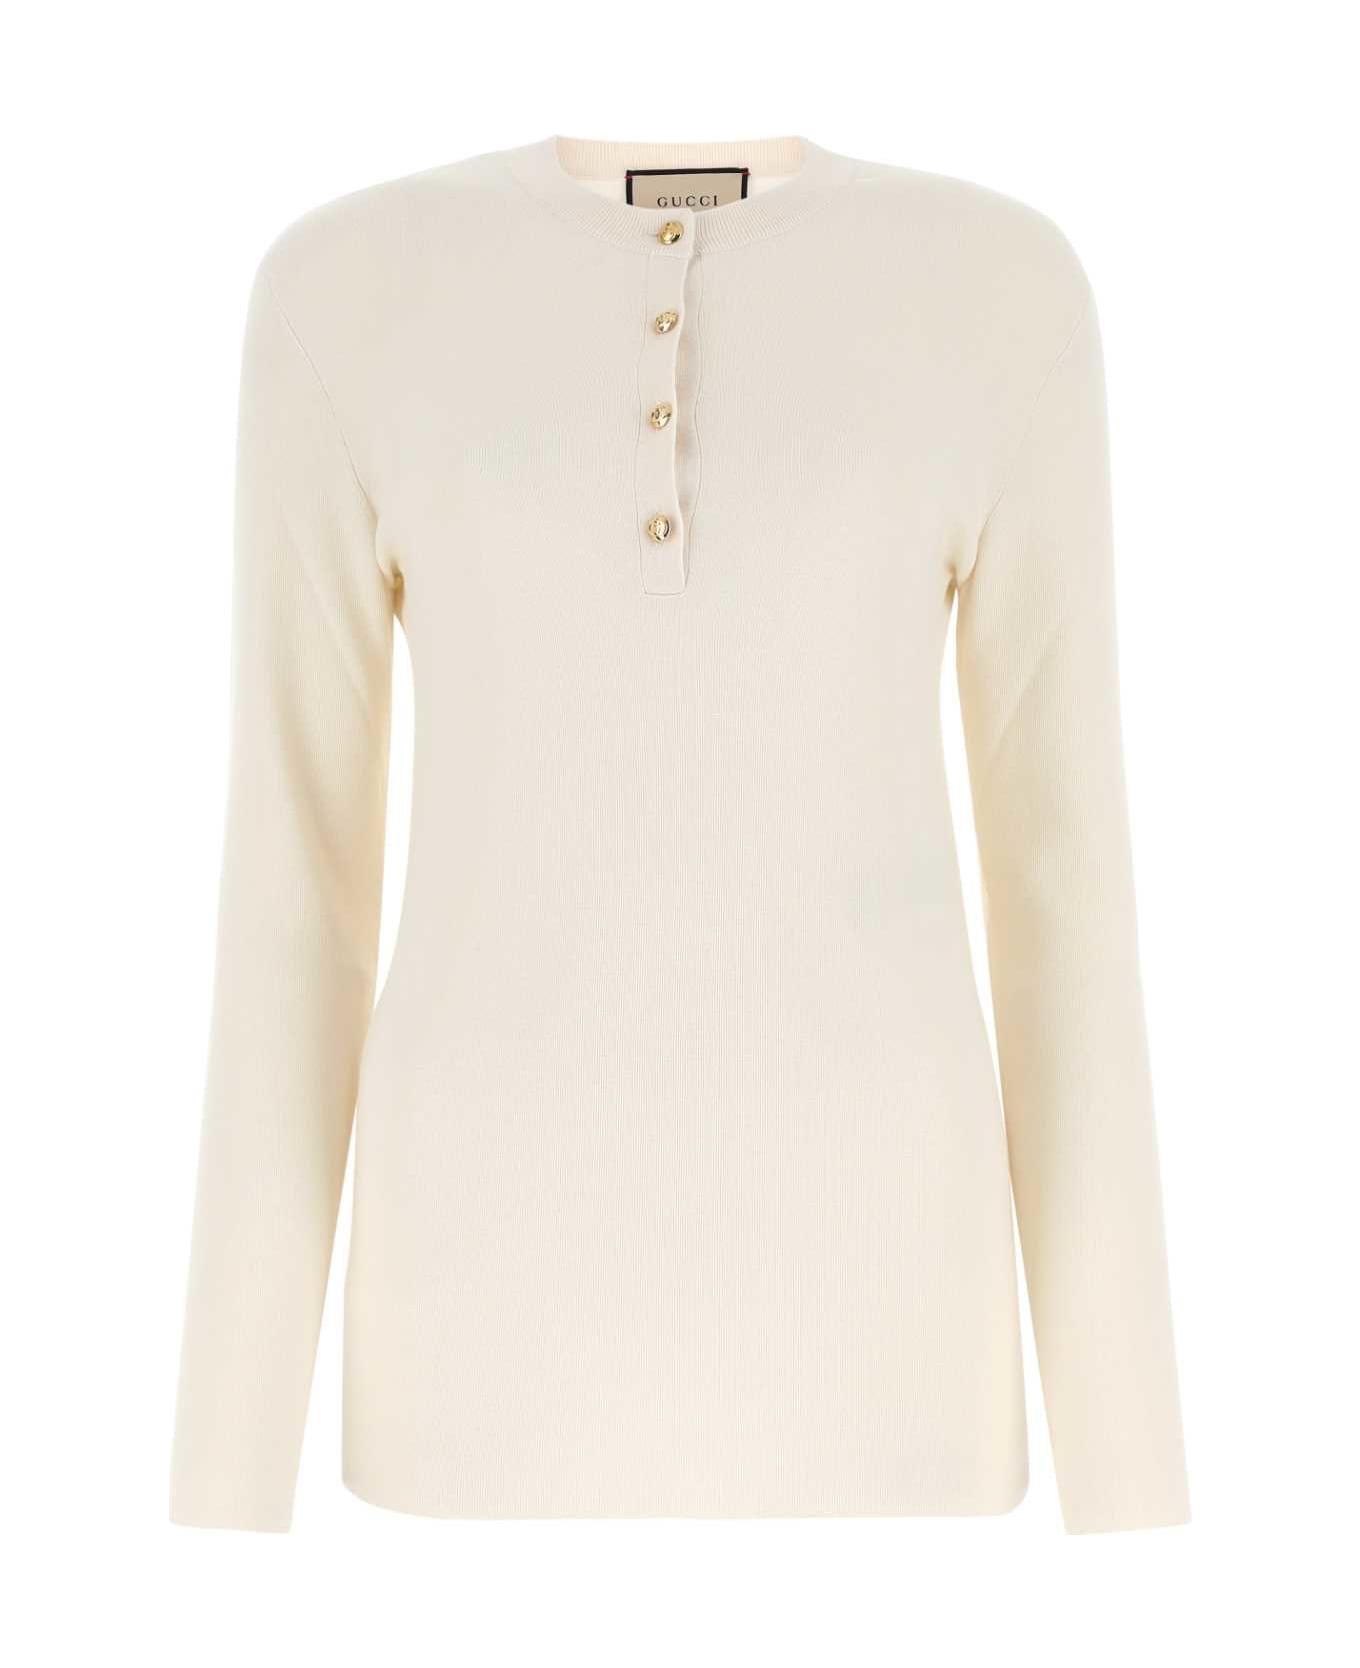 Gucci Ivory Cashmere Top - White